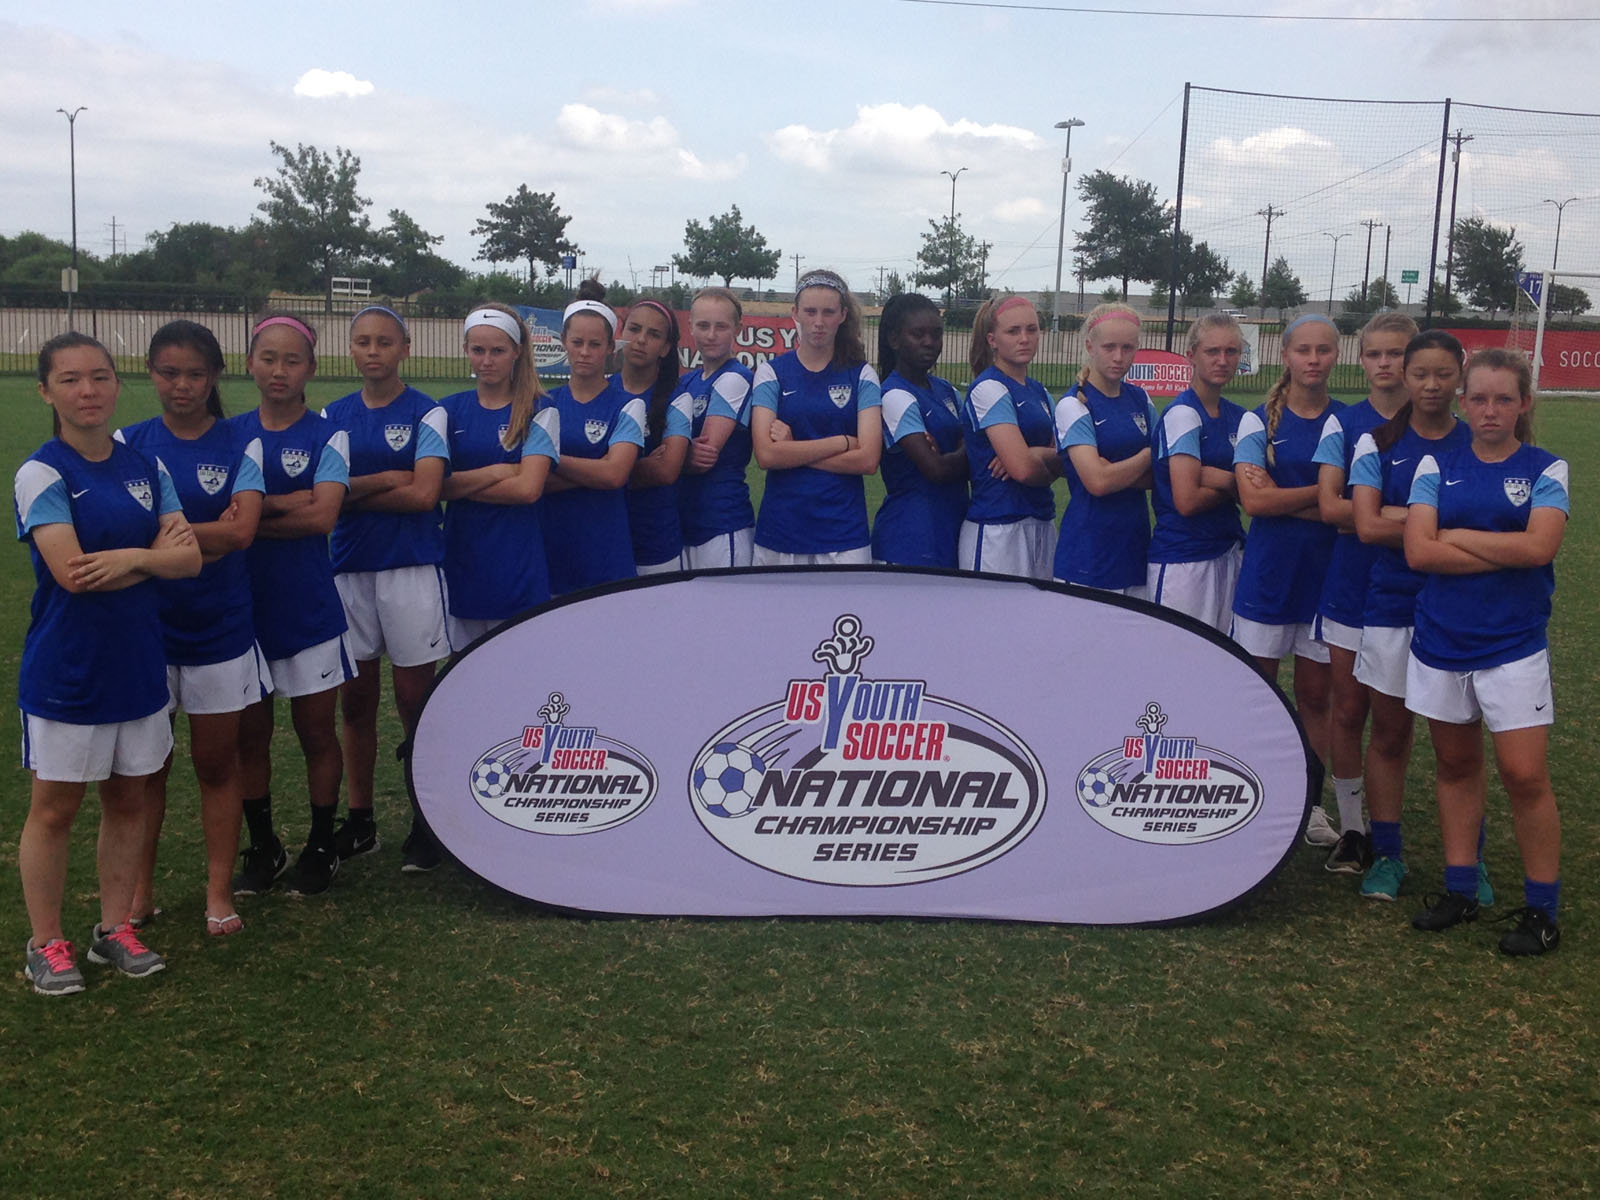 Va. youth soccer team places 2nd in national championship WTOP News